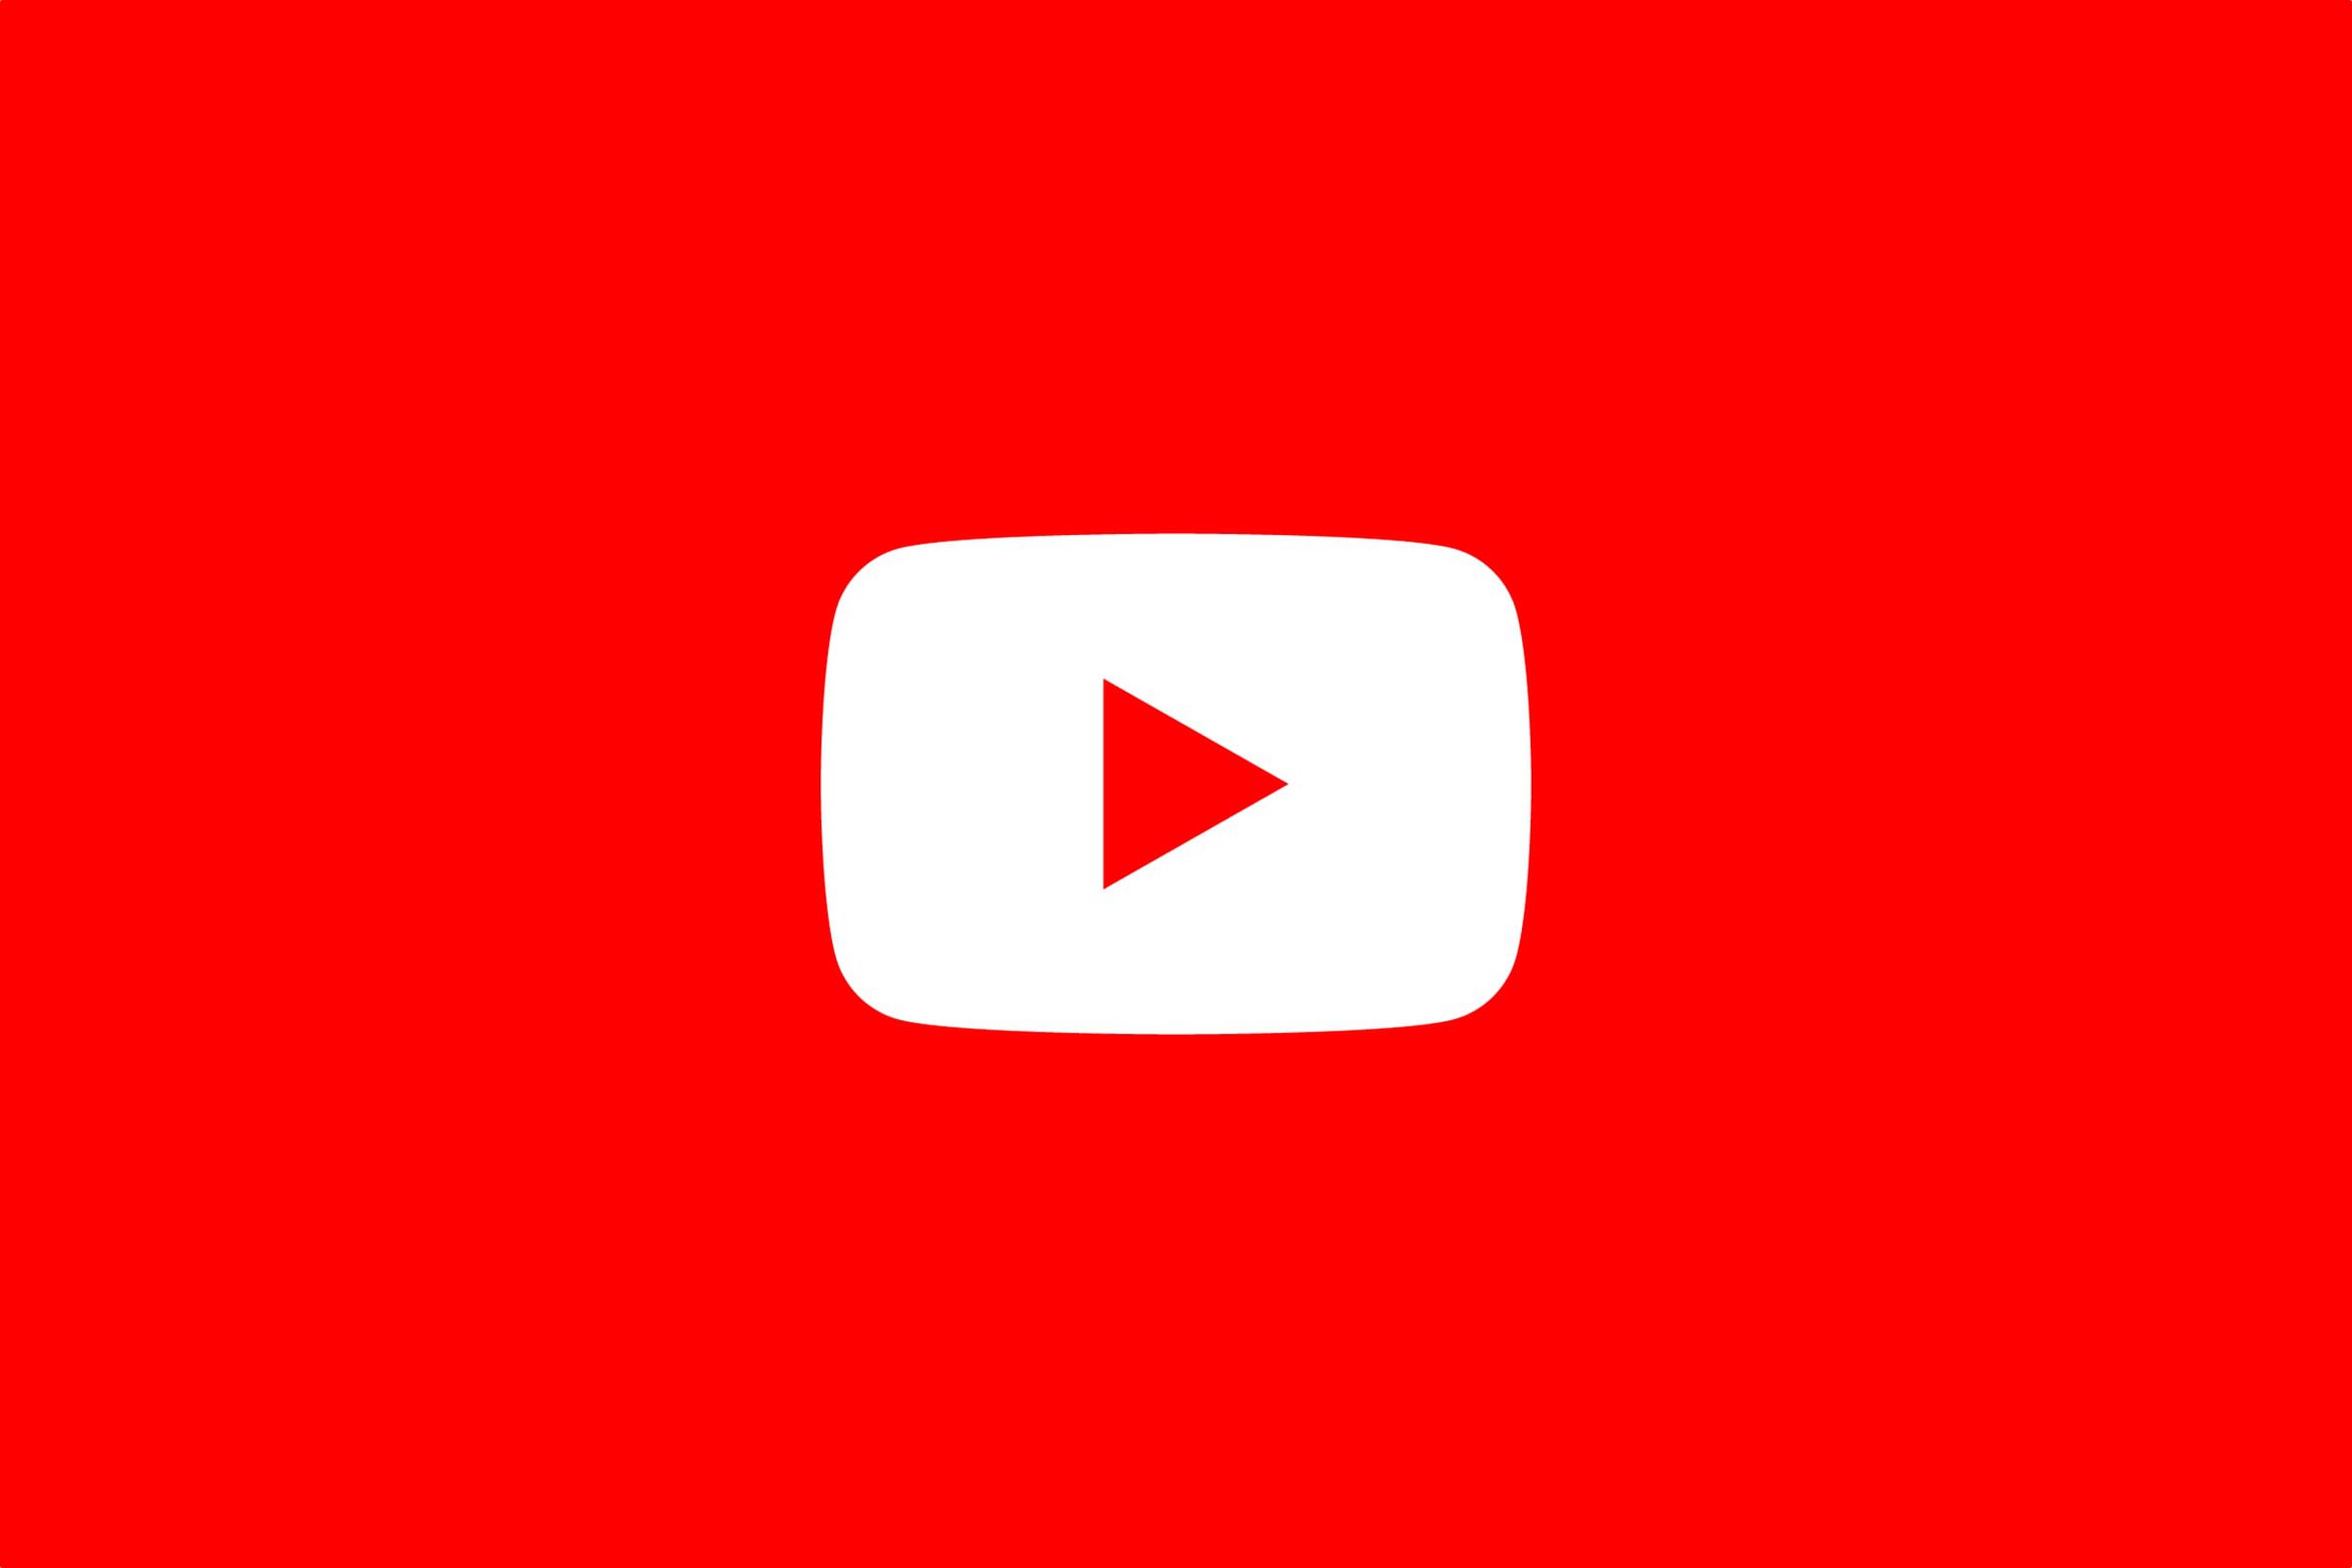 The YouTube icon on a red background.